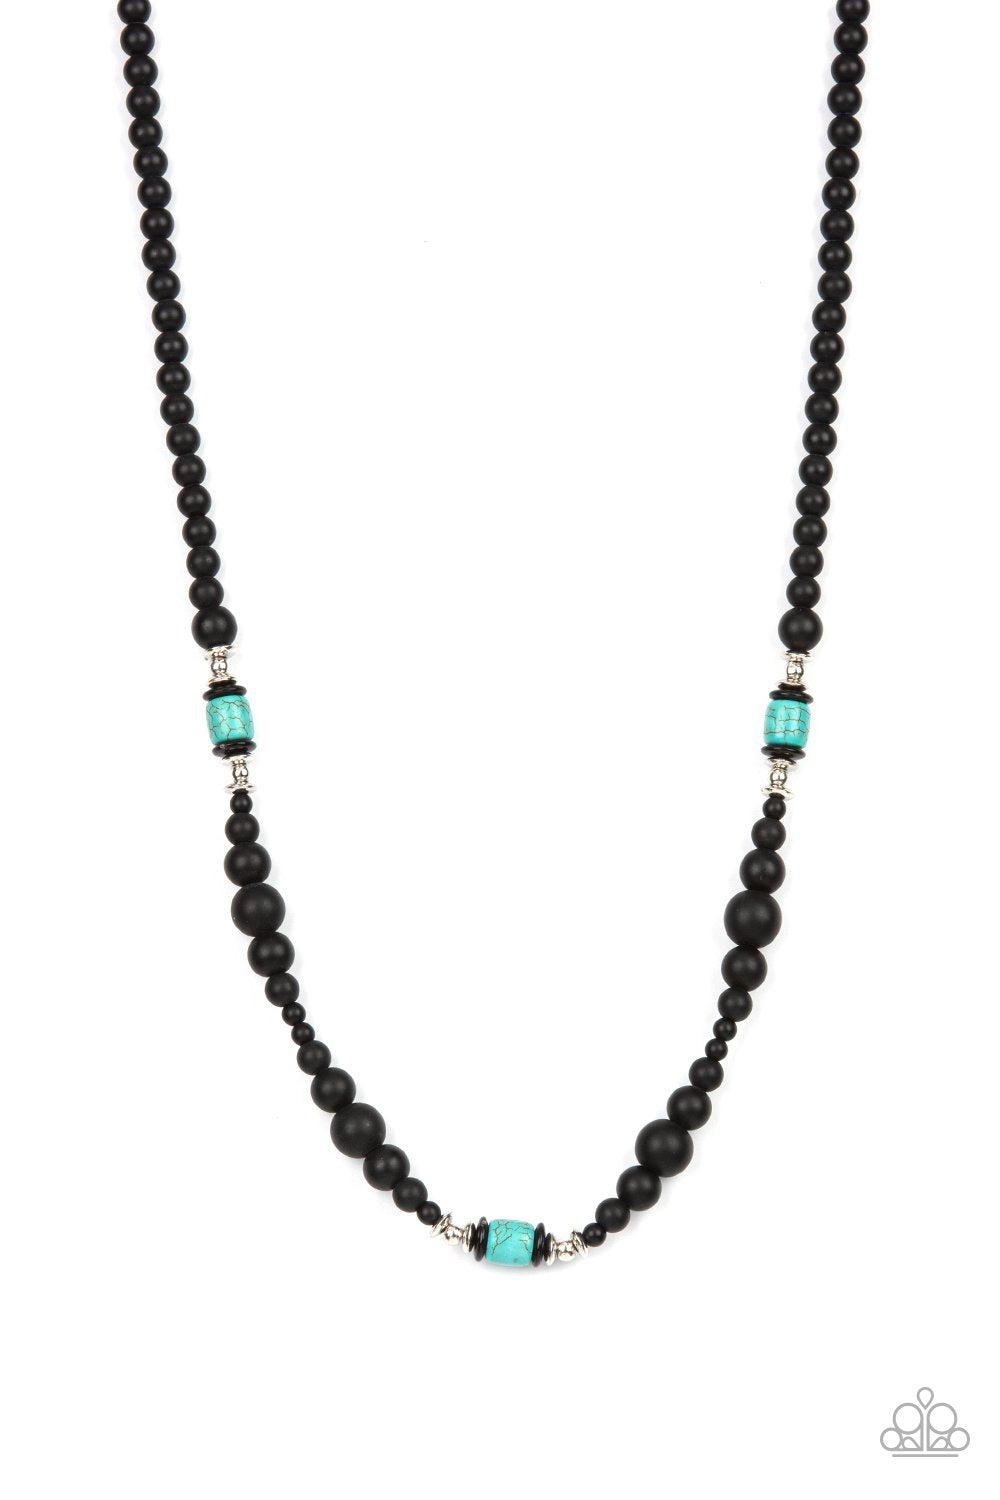 Stone Synchrony Turquoise Blue and Black Stone Urban Necklace - Paparazzi Accessories- lightbox - CarasShop.com - $5 Jewelry by Cara Jewels